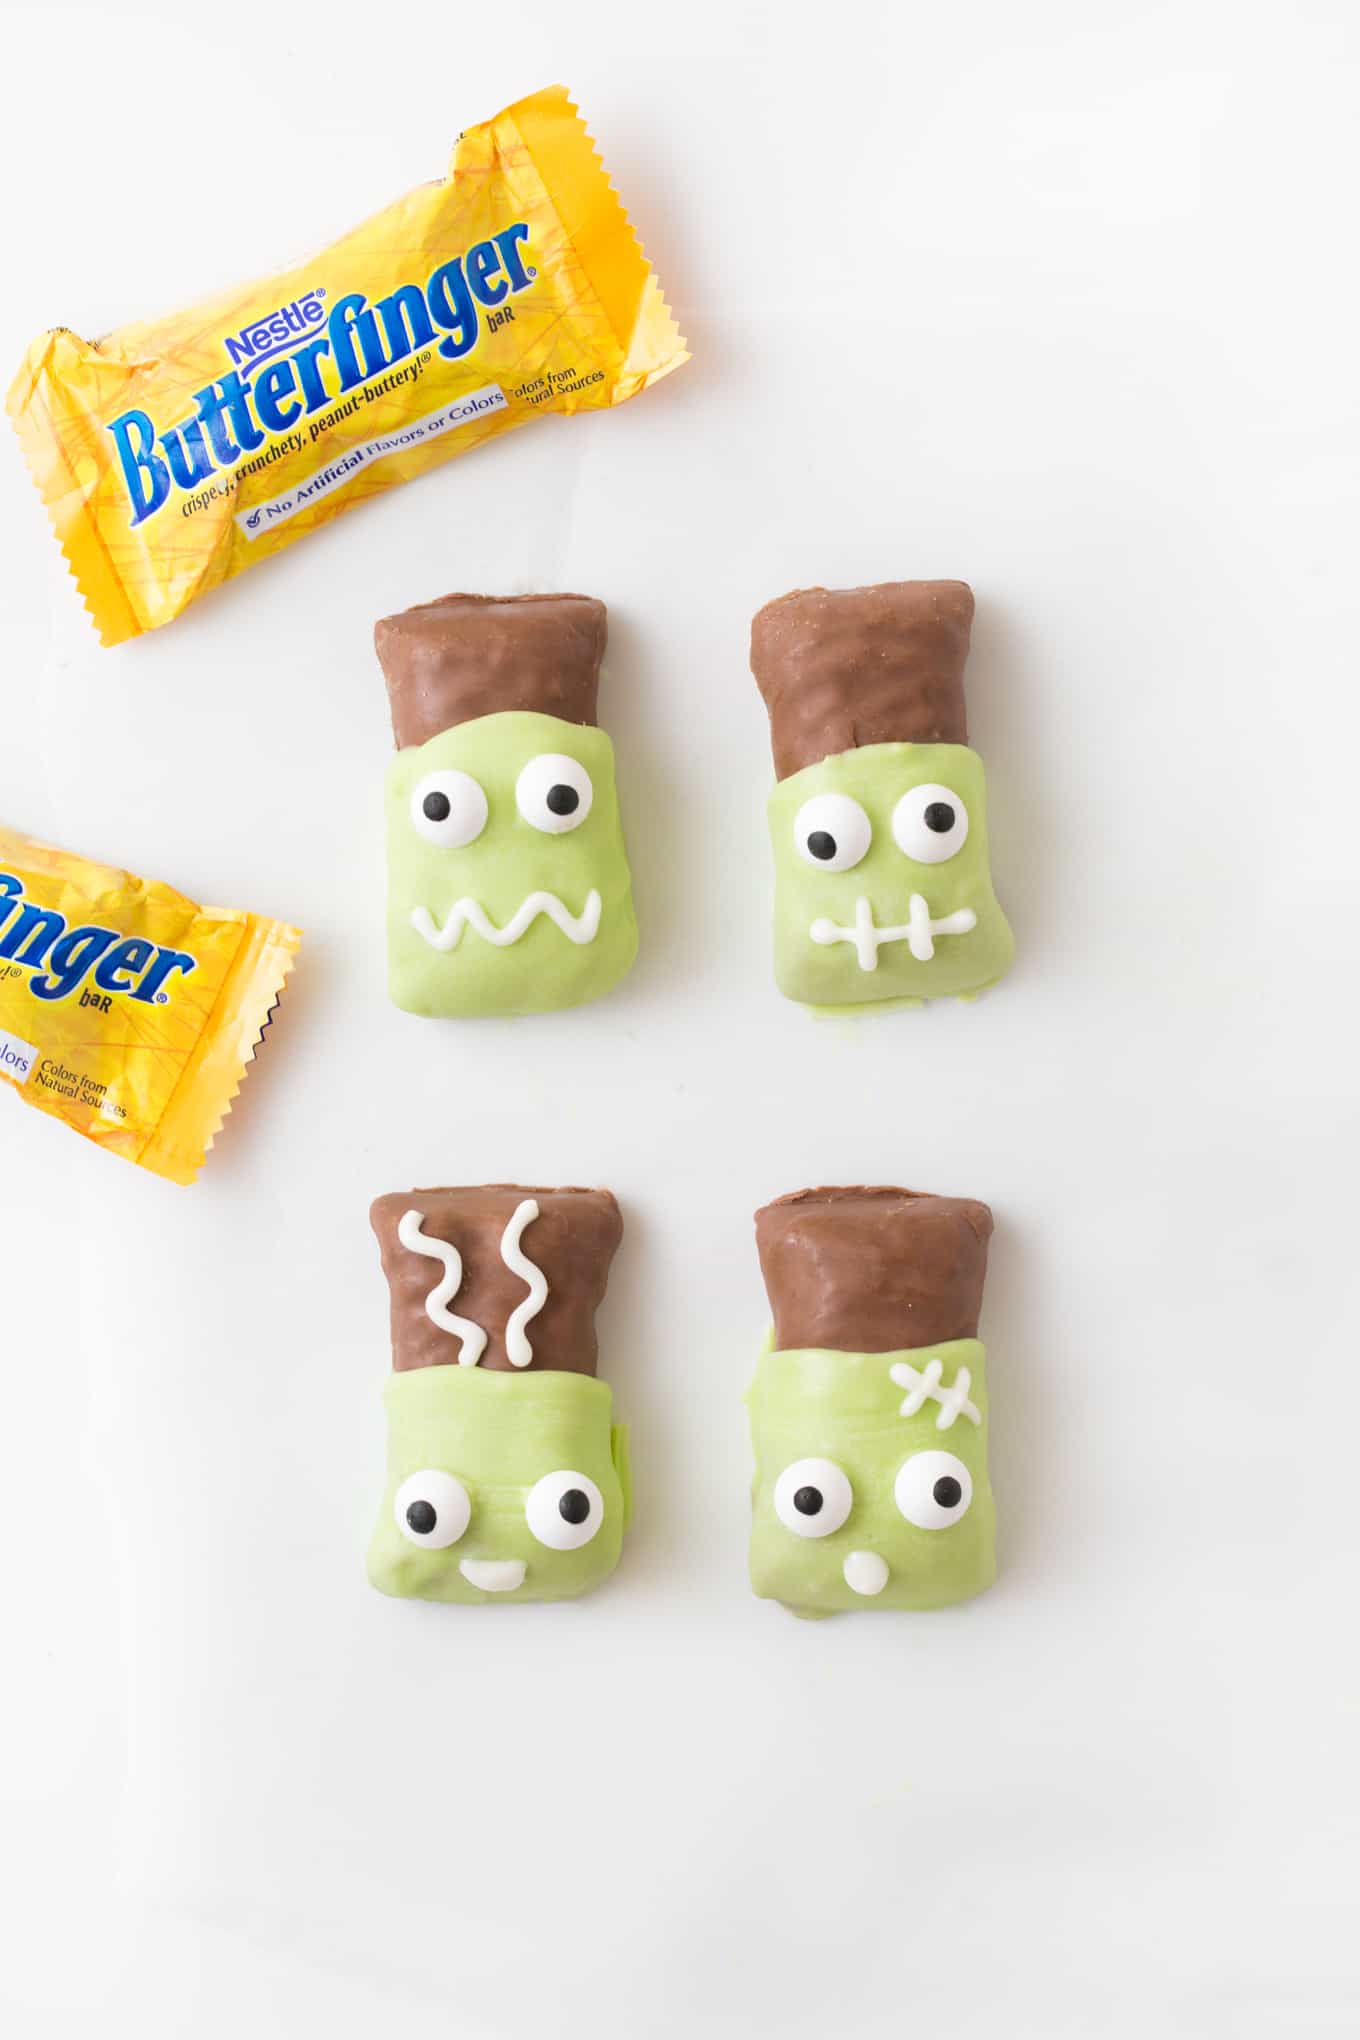 Butterfinger candy bars that have been dipped in melted green almond bark then decorated with candy eyeballs to look like Frankenstein and Frankenstein's bride.